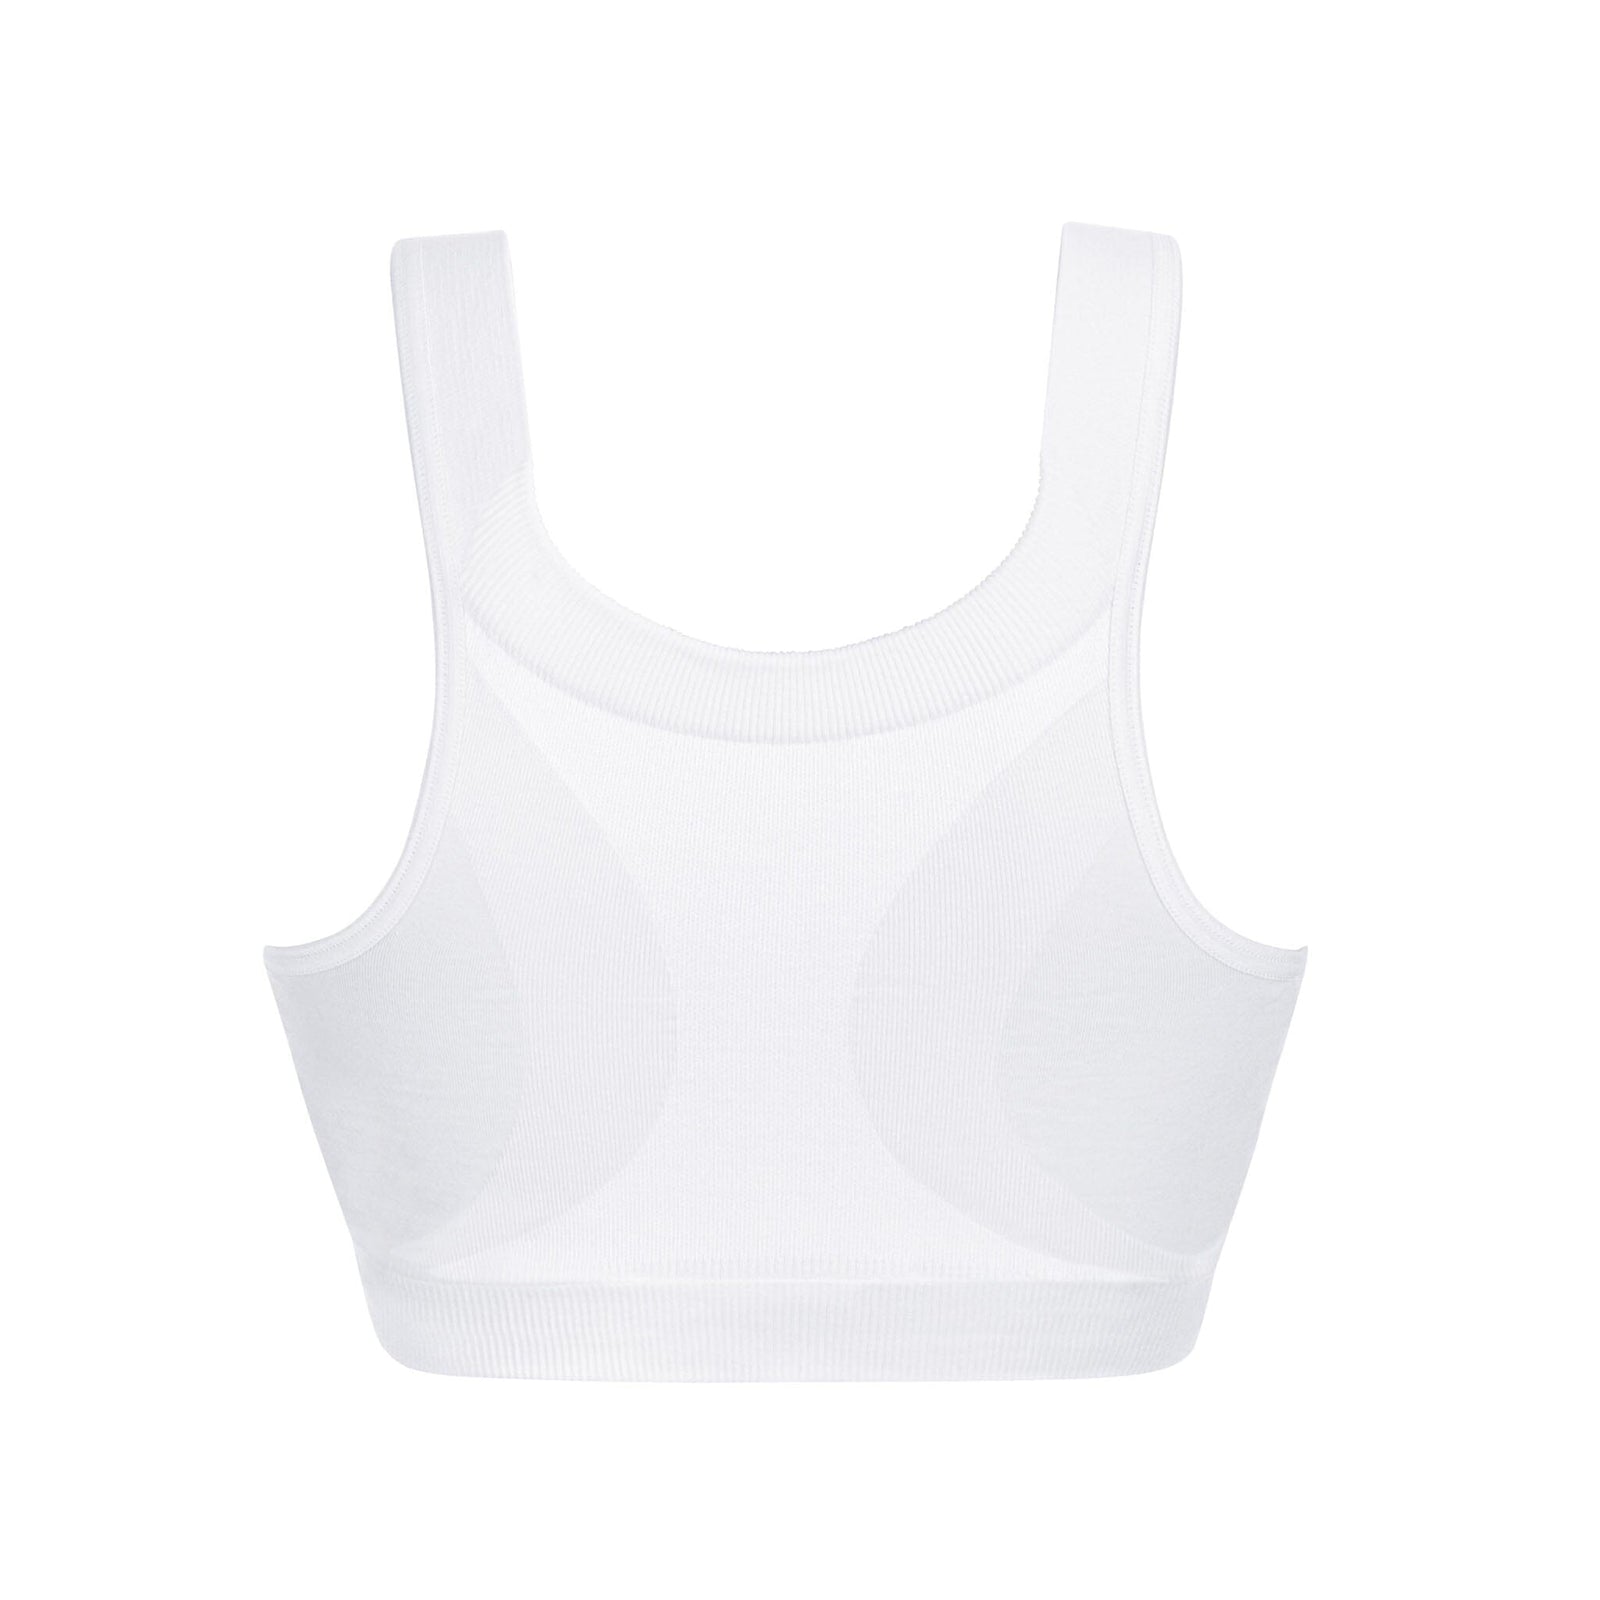 Theraport Post-Surgical Bra